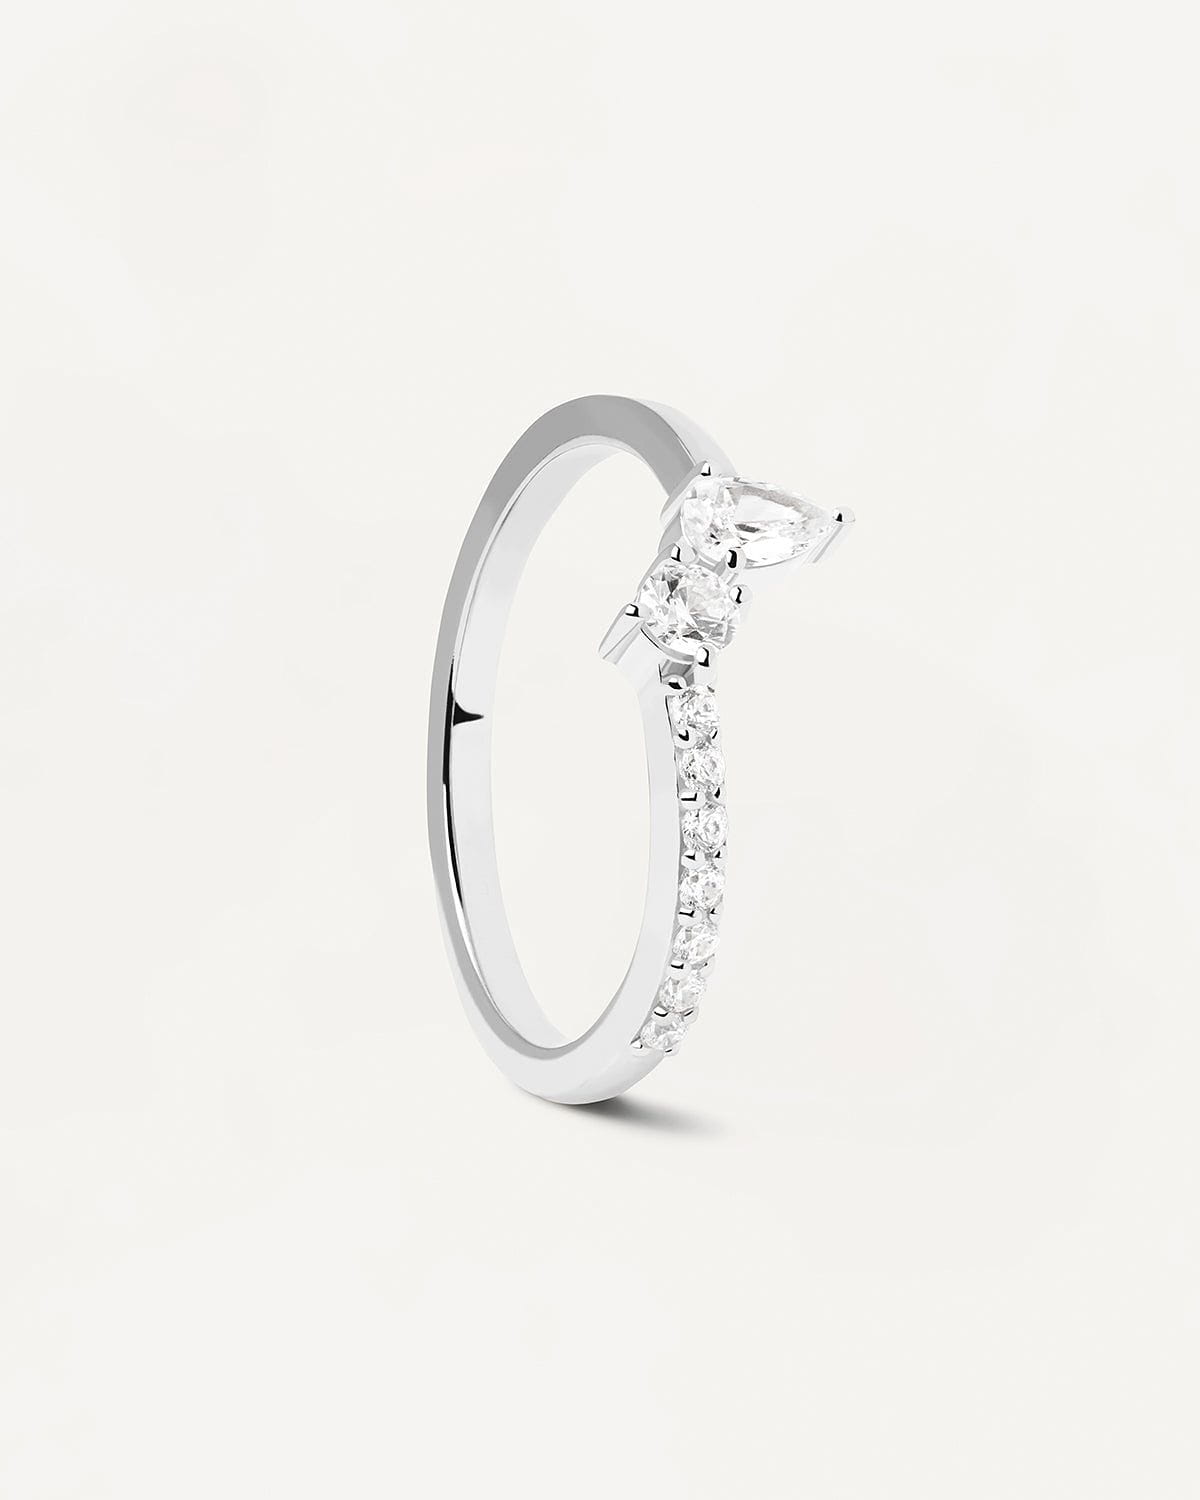 2024 Selection | Ava Silver Ring. Sterling silver ring with white crystals in different sizes. Get the latest arrival from PDPAOLA. Place your order safely and get this Best Seller. Free Shipping.